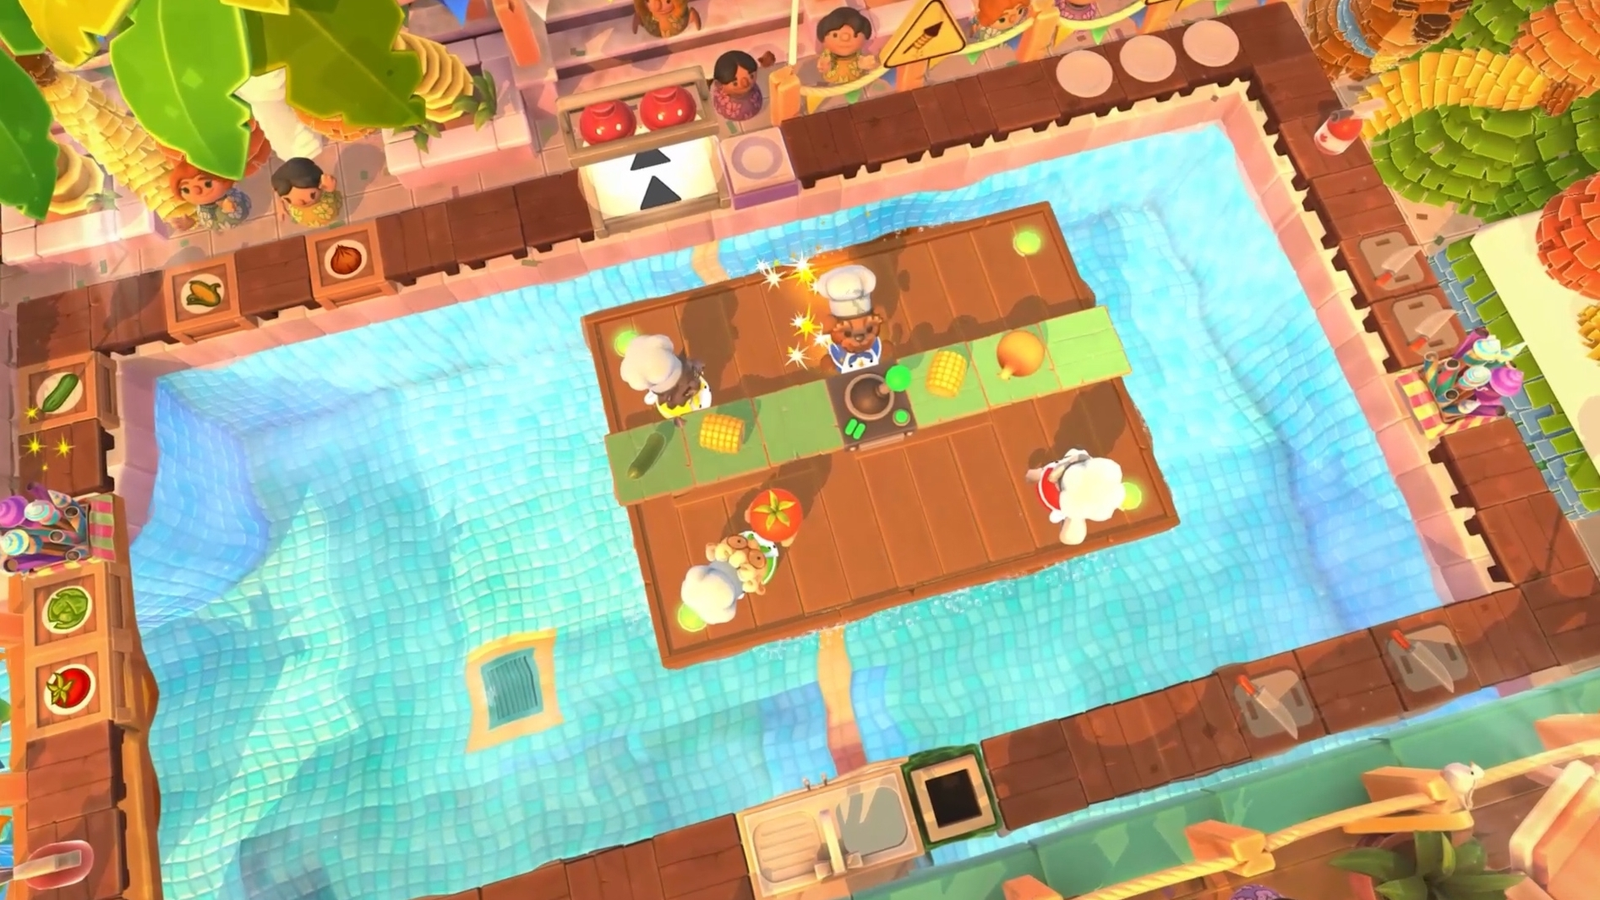 Overcooked! All You Can Eat Arriving on Switch, PS4, Xbox One, and